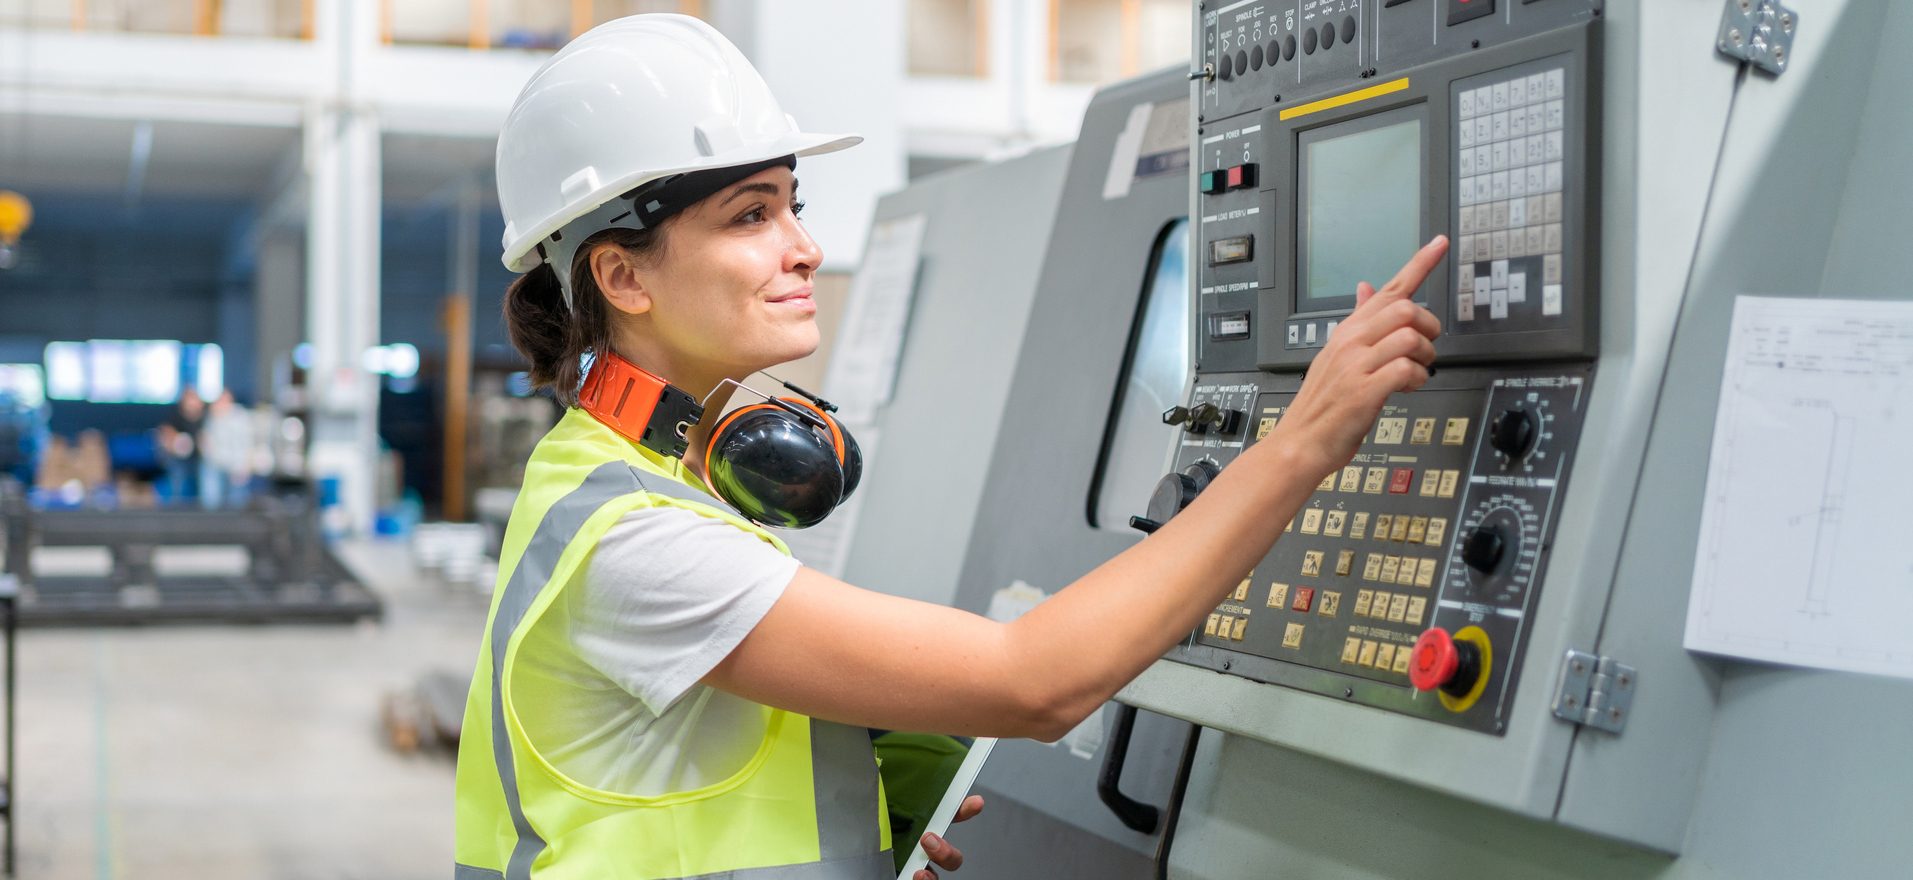 About The ACT - Lady Works At Control Panel 